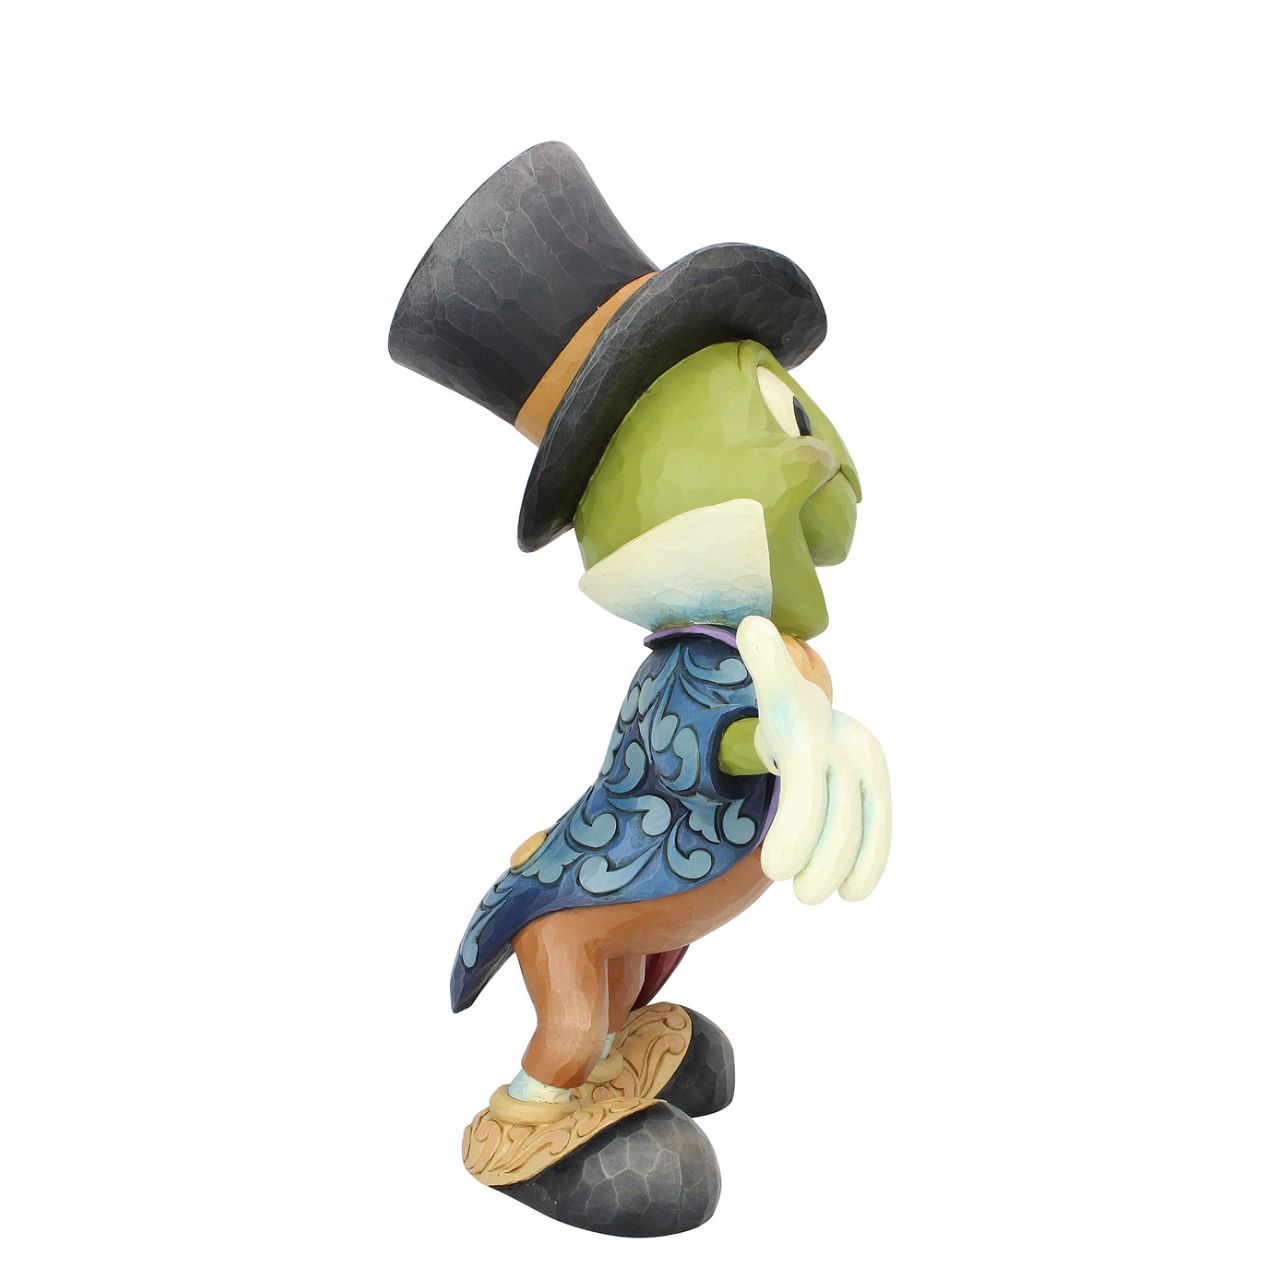 Jim Shore Cricket's the Name. Jiminy Cricket Statement Figurine  Jiminy Cricket, Pinocchio's conscience, smiles brightly in this Jim Shore figurine. Dressed in his classic suit, ascot, and top hat, Disney's unofficial mascot holds his umbrella ready to issue advice to anyone in moral dilemma.